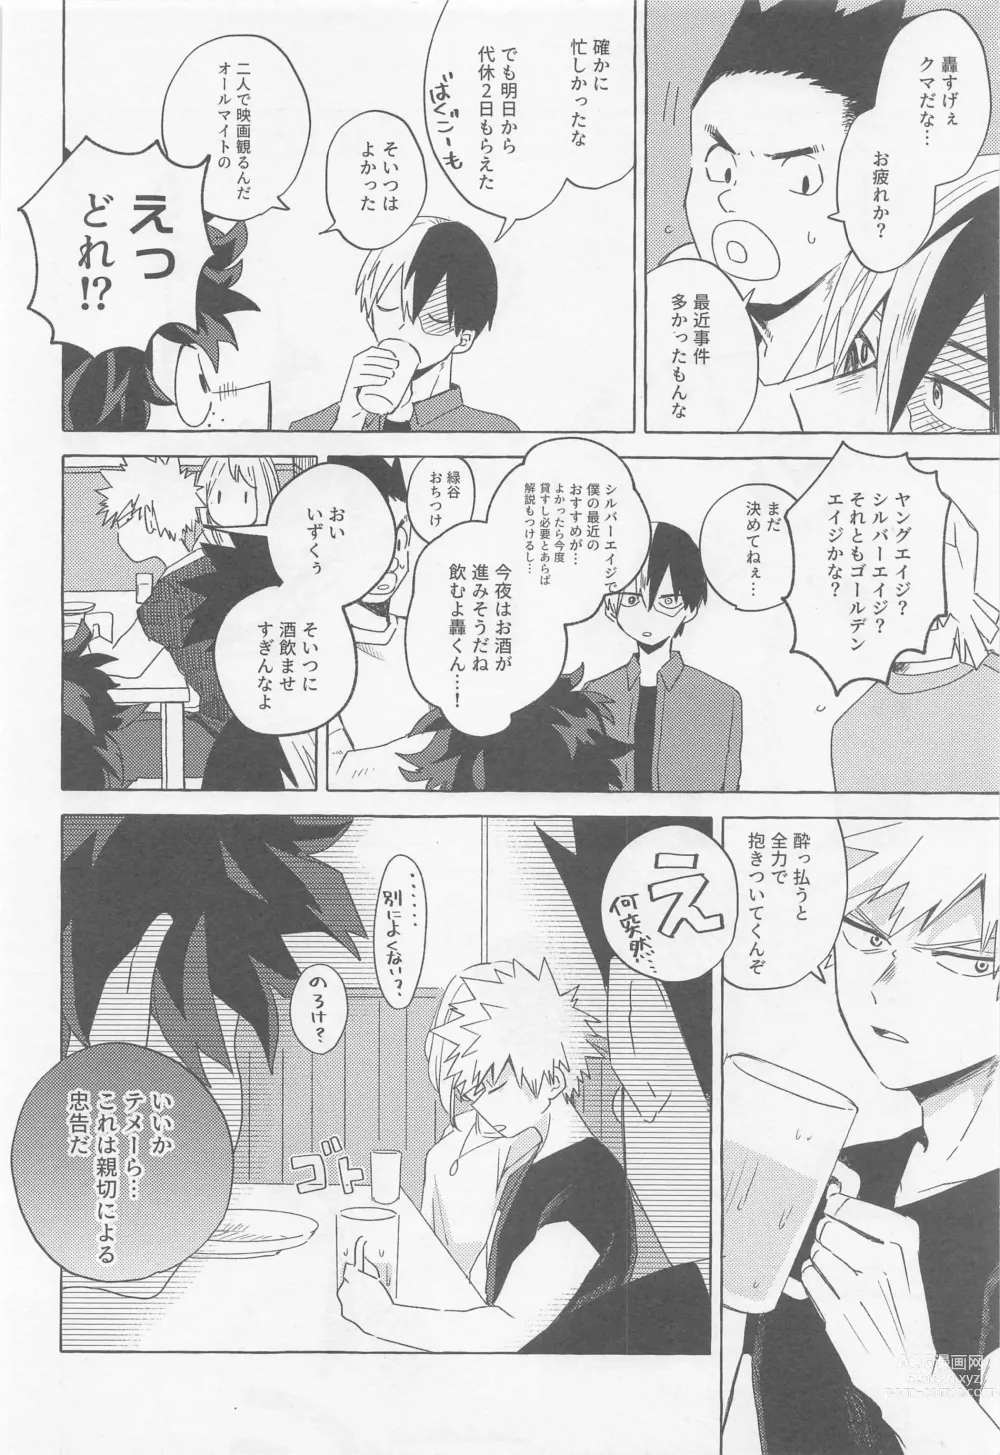 Page 7 of doujinshi Overnight Fight